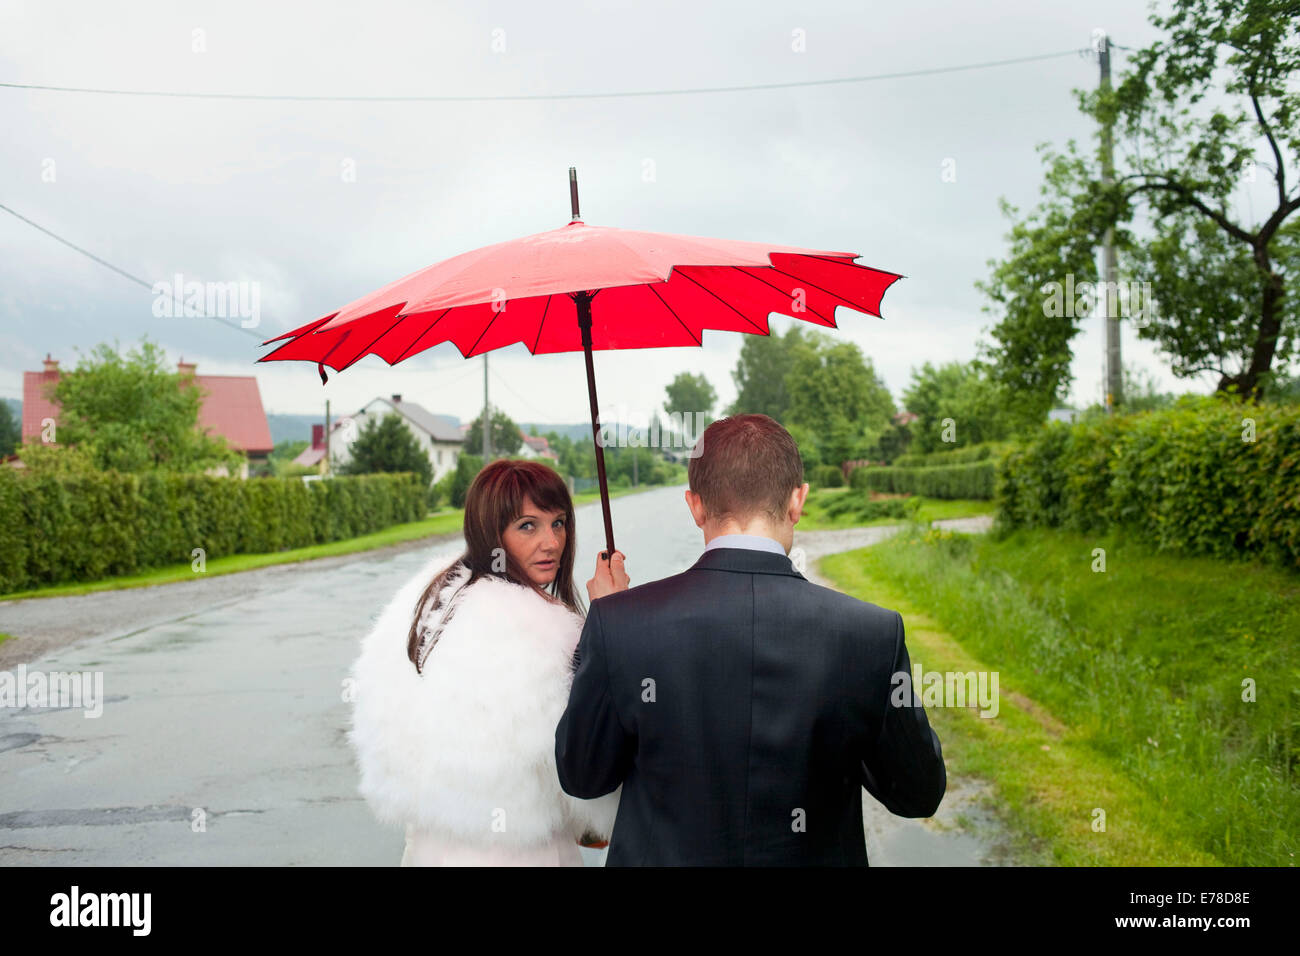 husband and wife walk down a rainy road to a formal occasion while the wife holds up a red umbrella to protect them both. Stock Photo